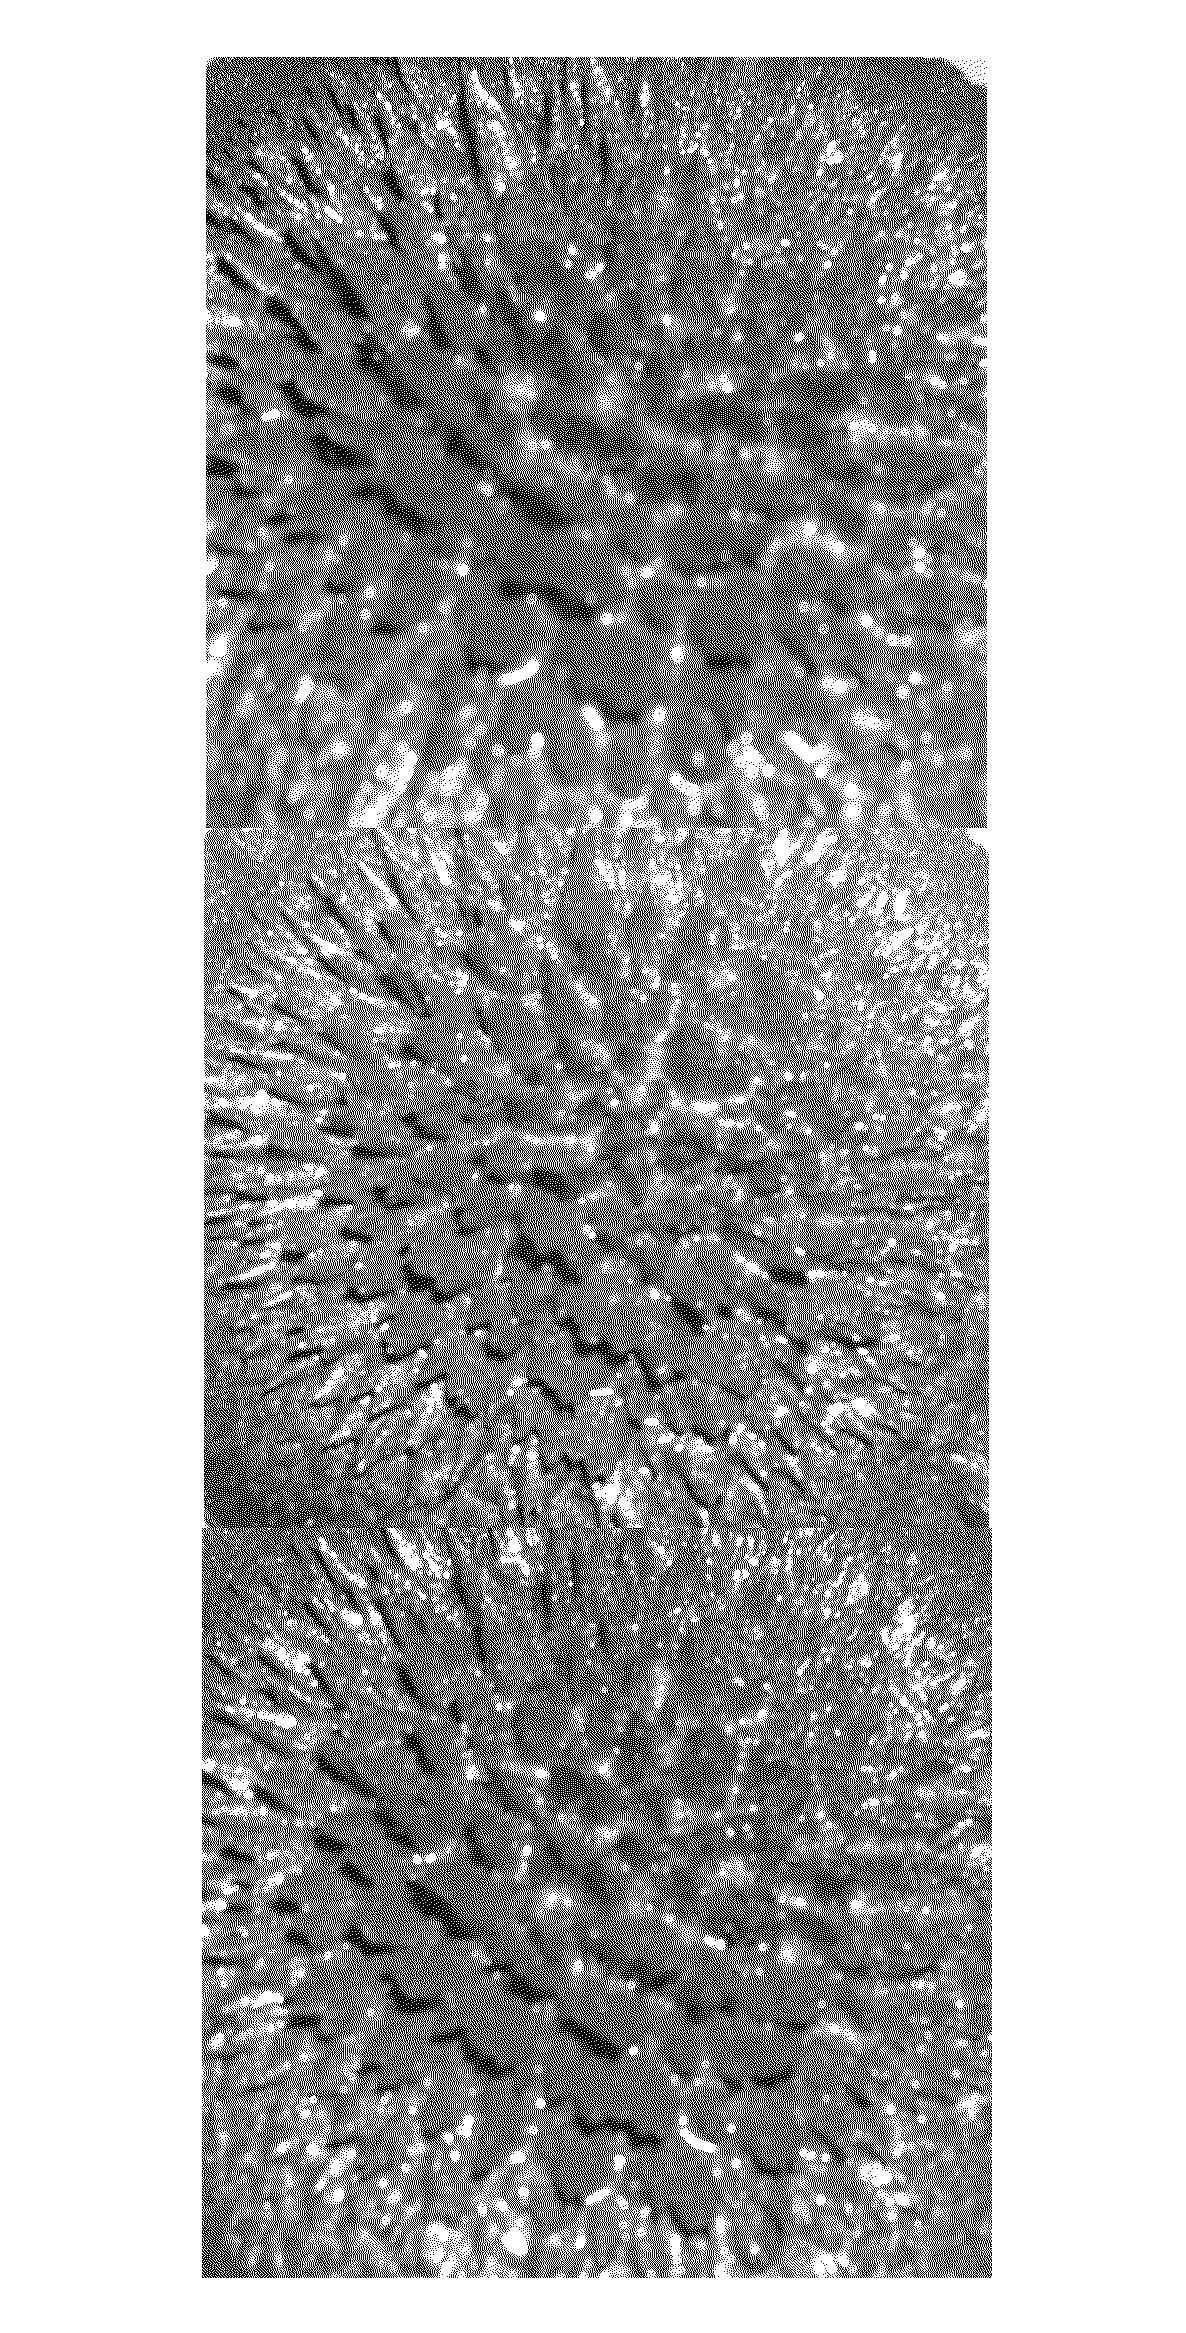 Porous materials embedded with nanoparticles, methods of fabrication and uses thereof